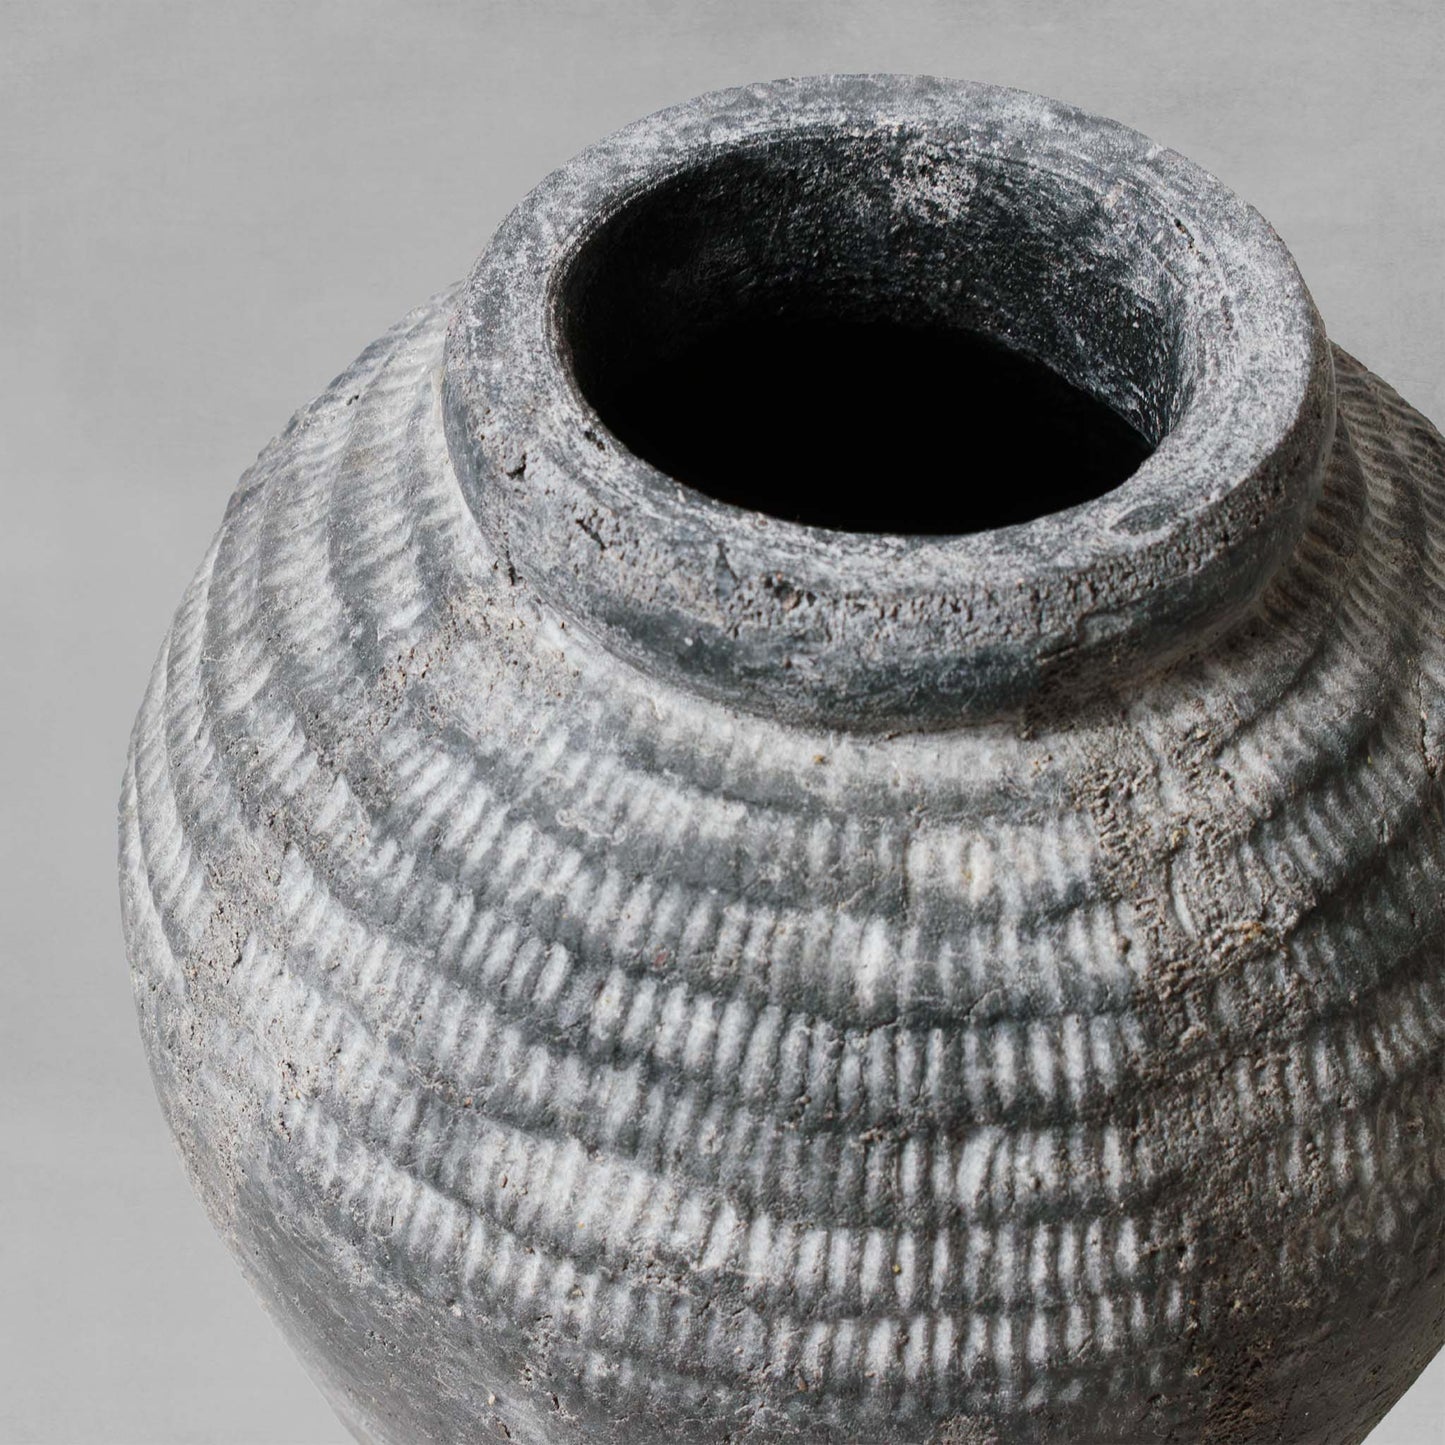 Closeup view of small artisanal weathered gray earthenware vase with gray background.